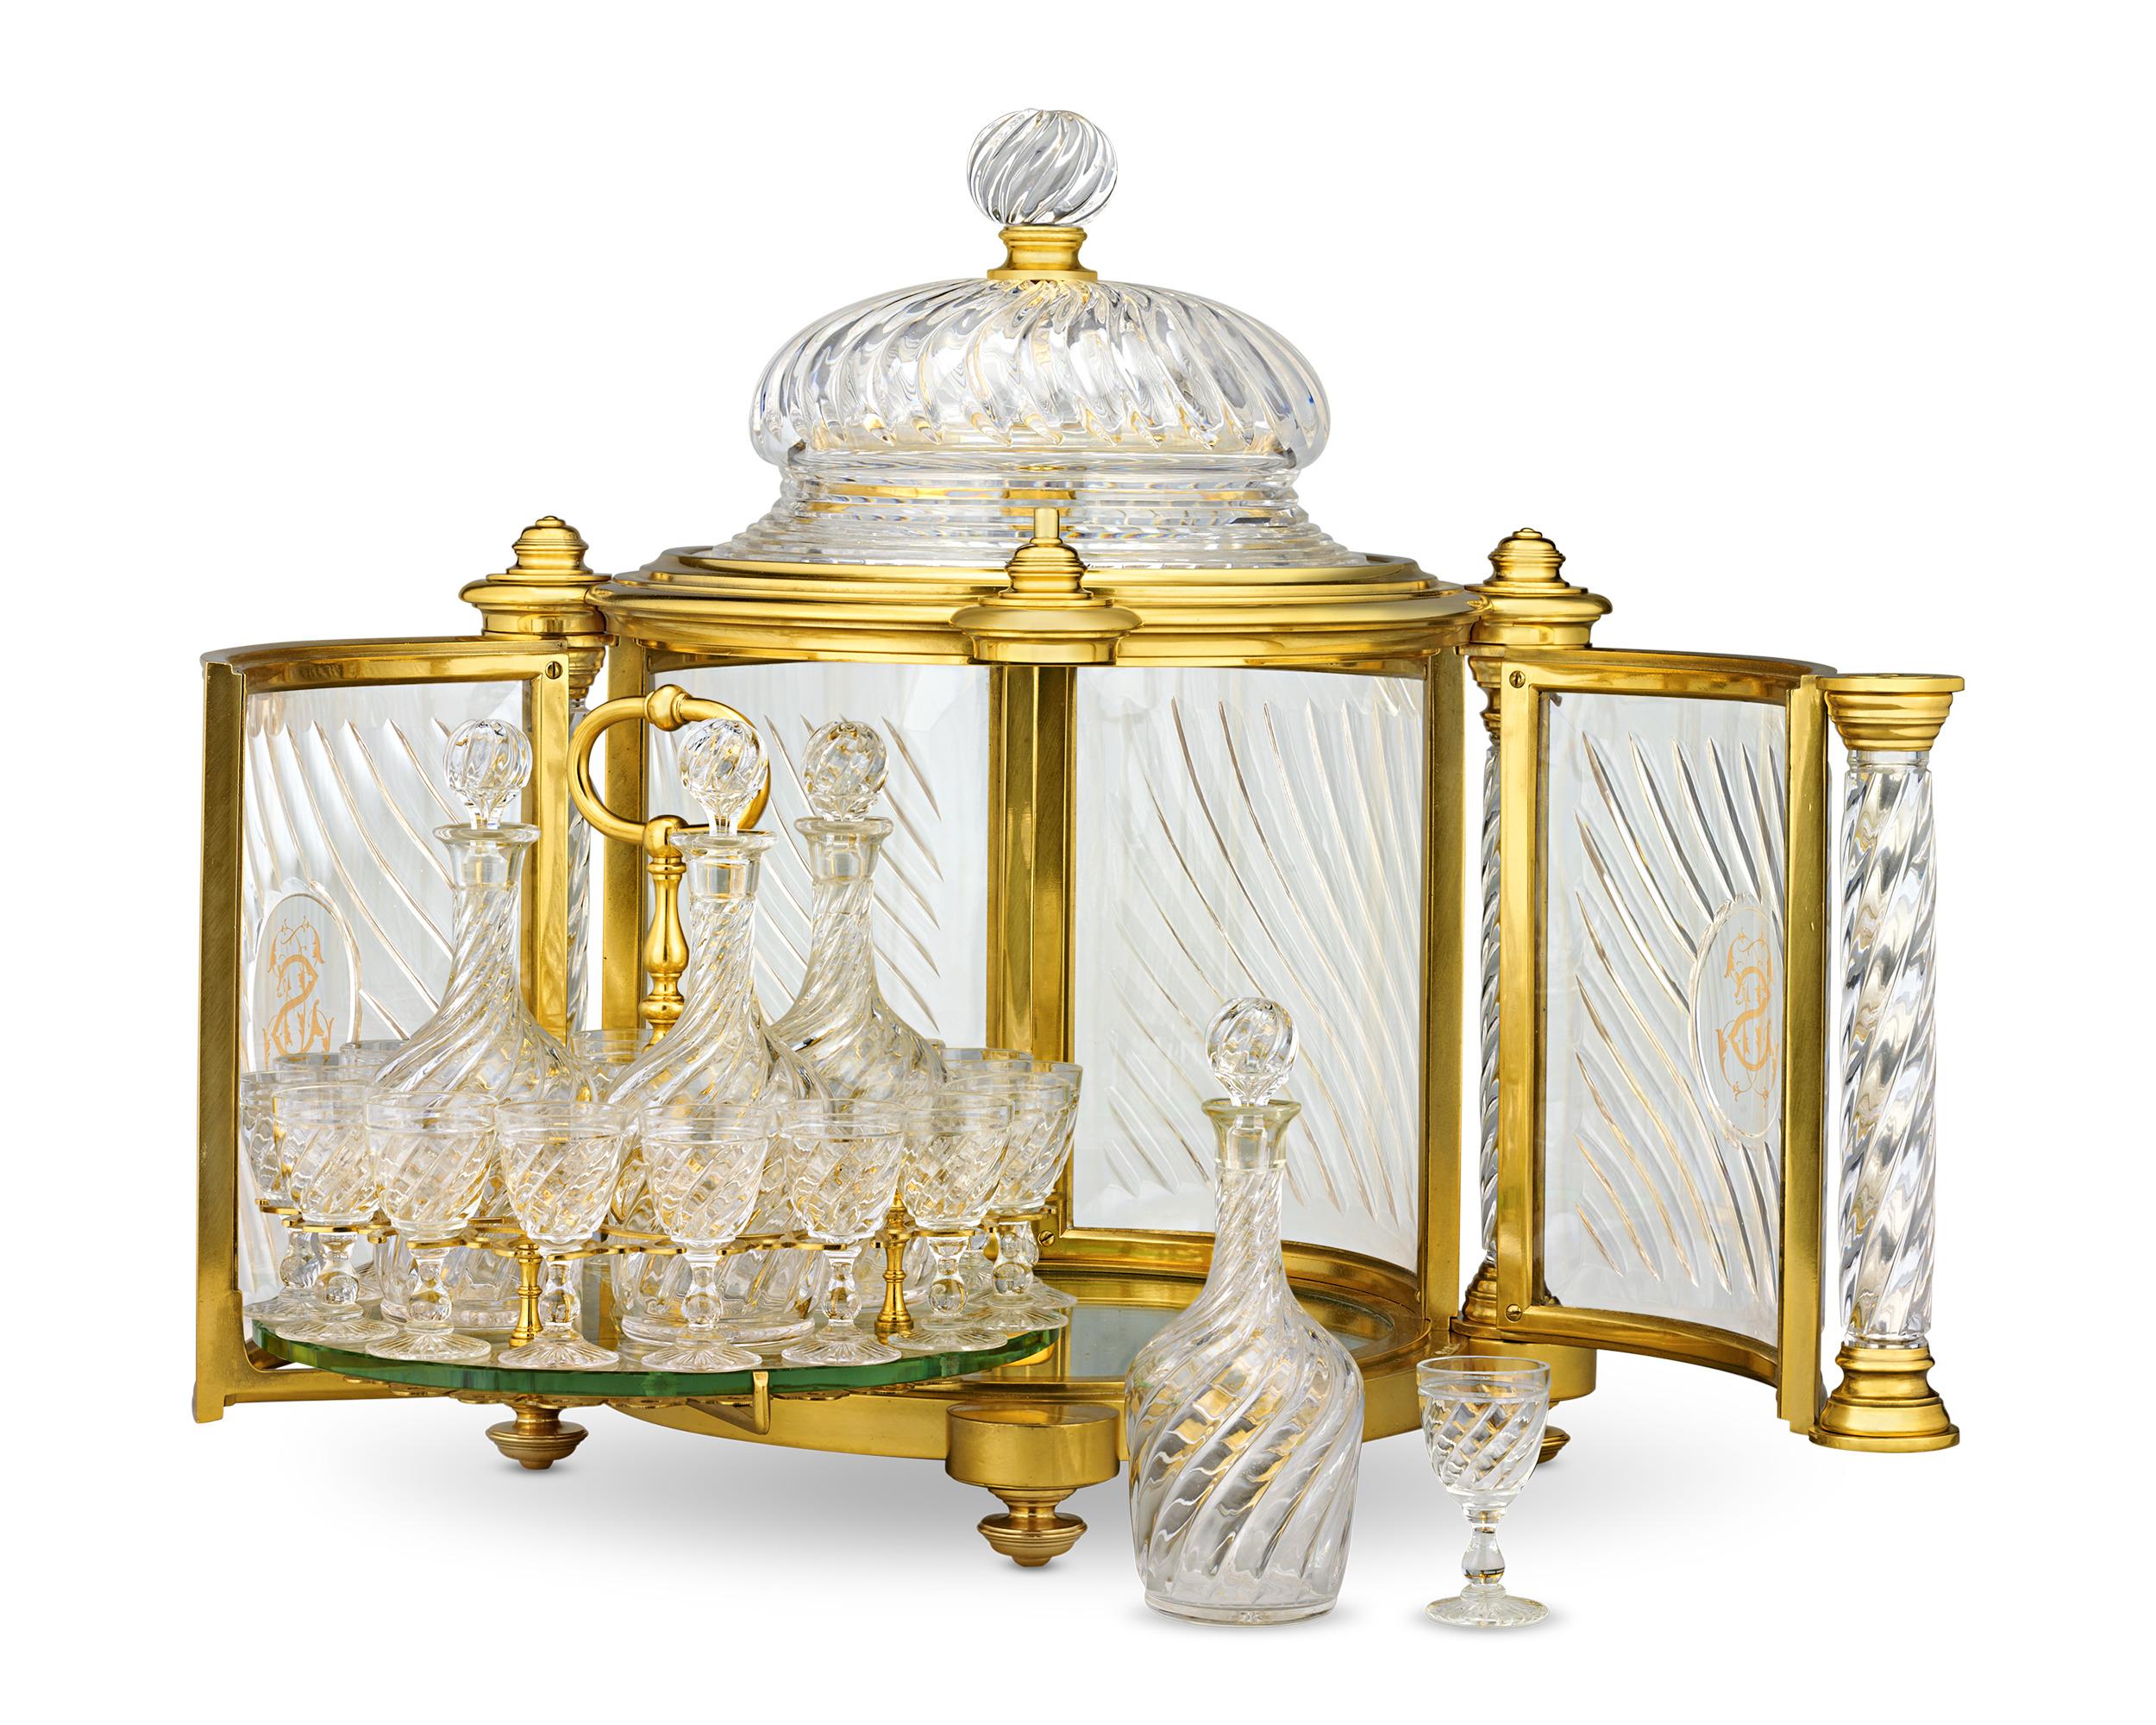 This monumental 19th-century ormolu liqueur casket is exemplary of the masterful craftsmanship of the famed luxury firm Baccarat. The doors open to reveal a mirrored base and a glass rack that cradles four exquisite bottles with stoppers and sixteen